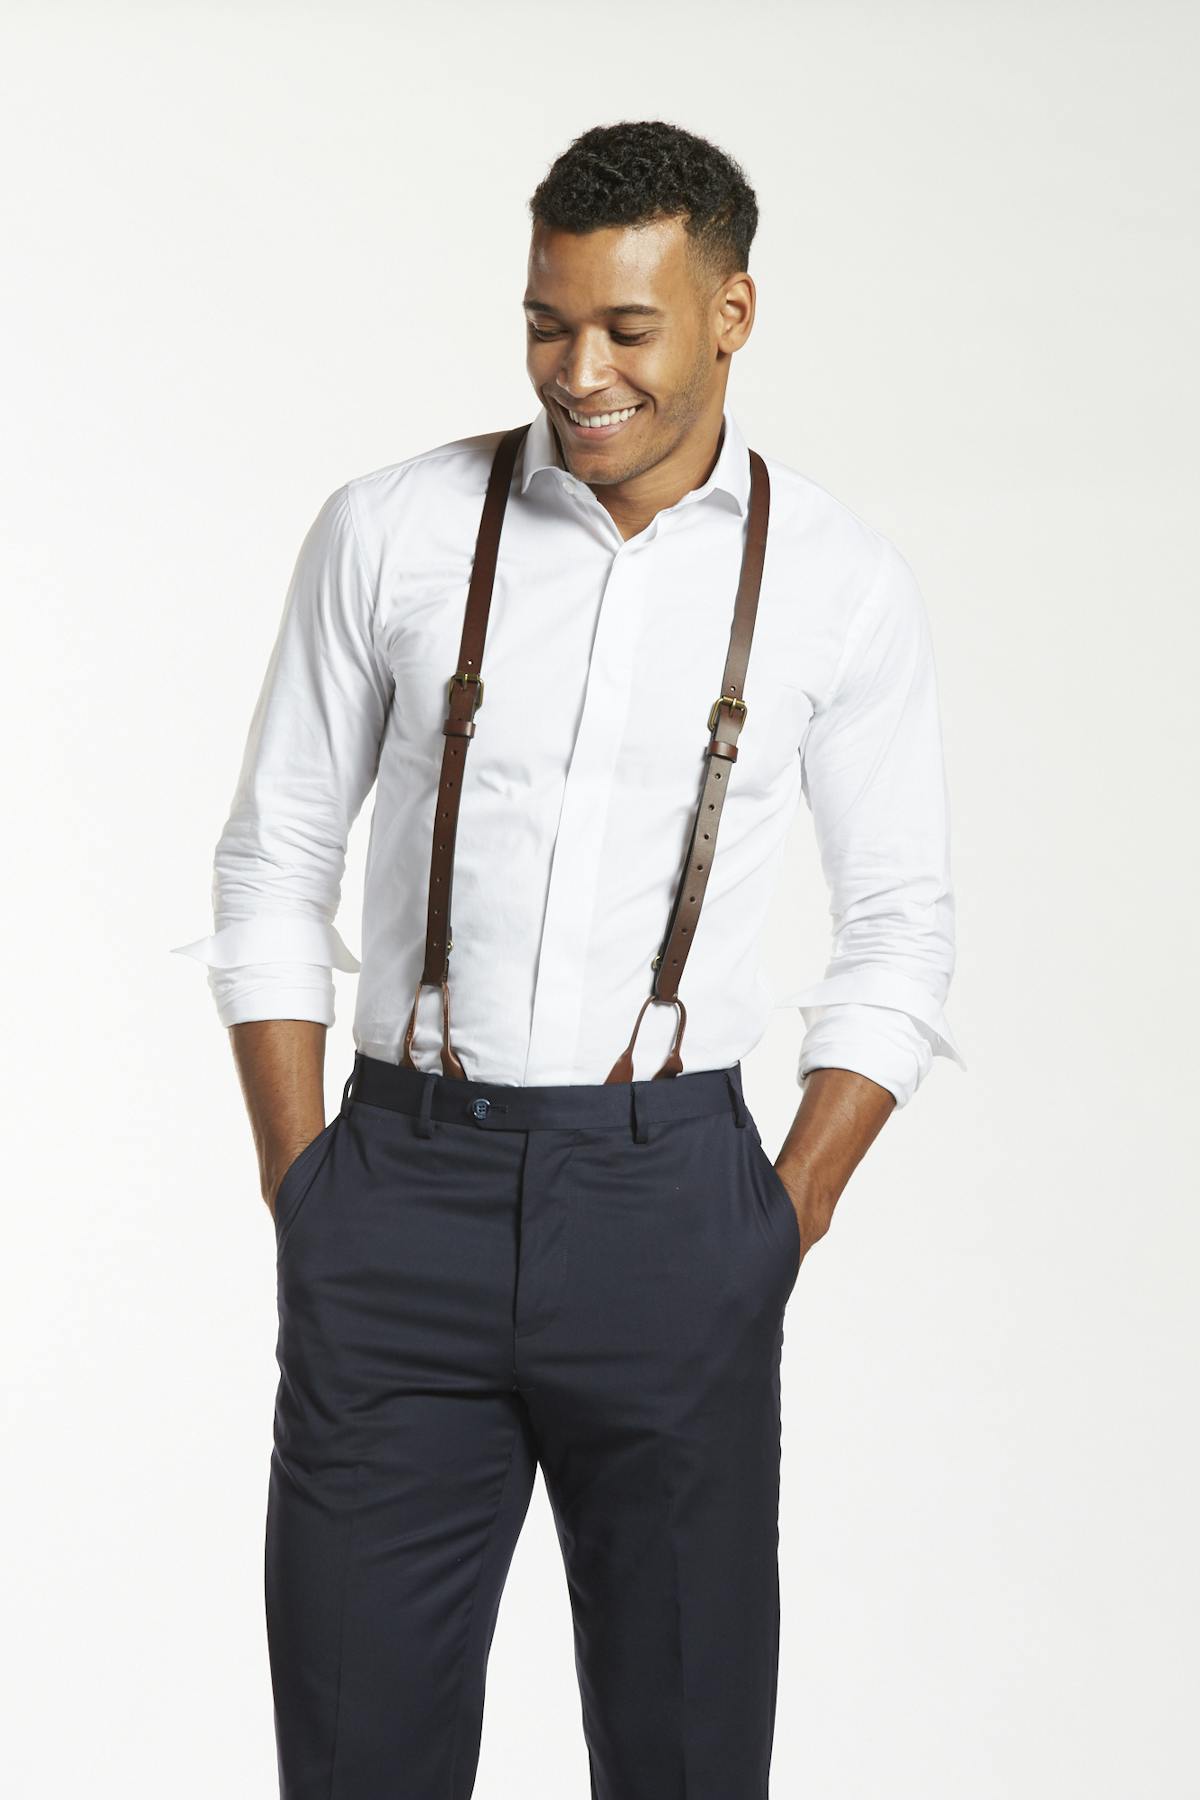 Formal Man In Shirt And Bow Tie Adjusting His Suspenders For A